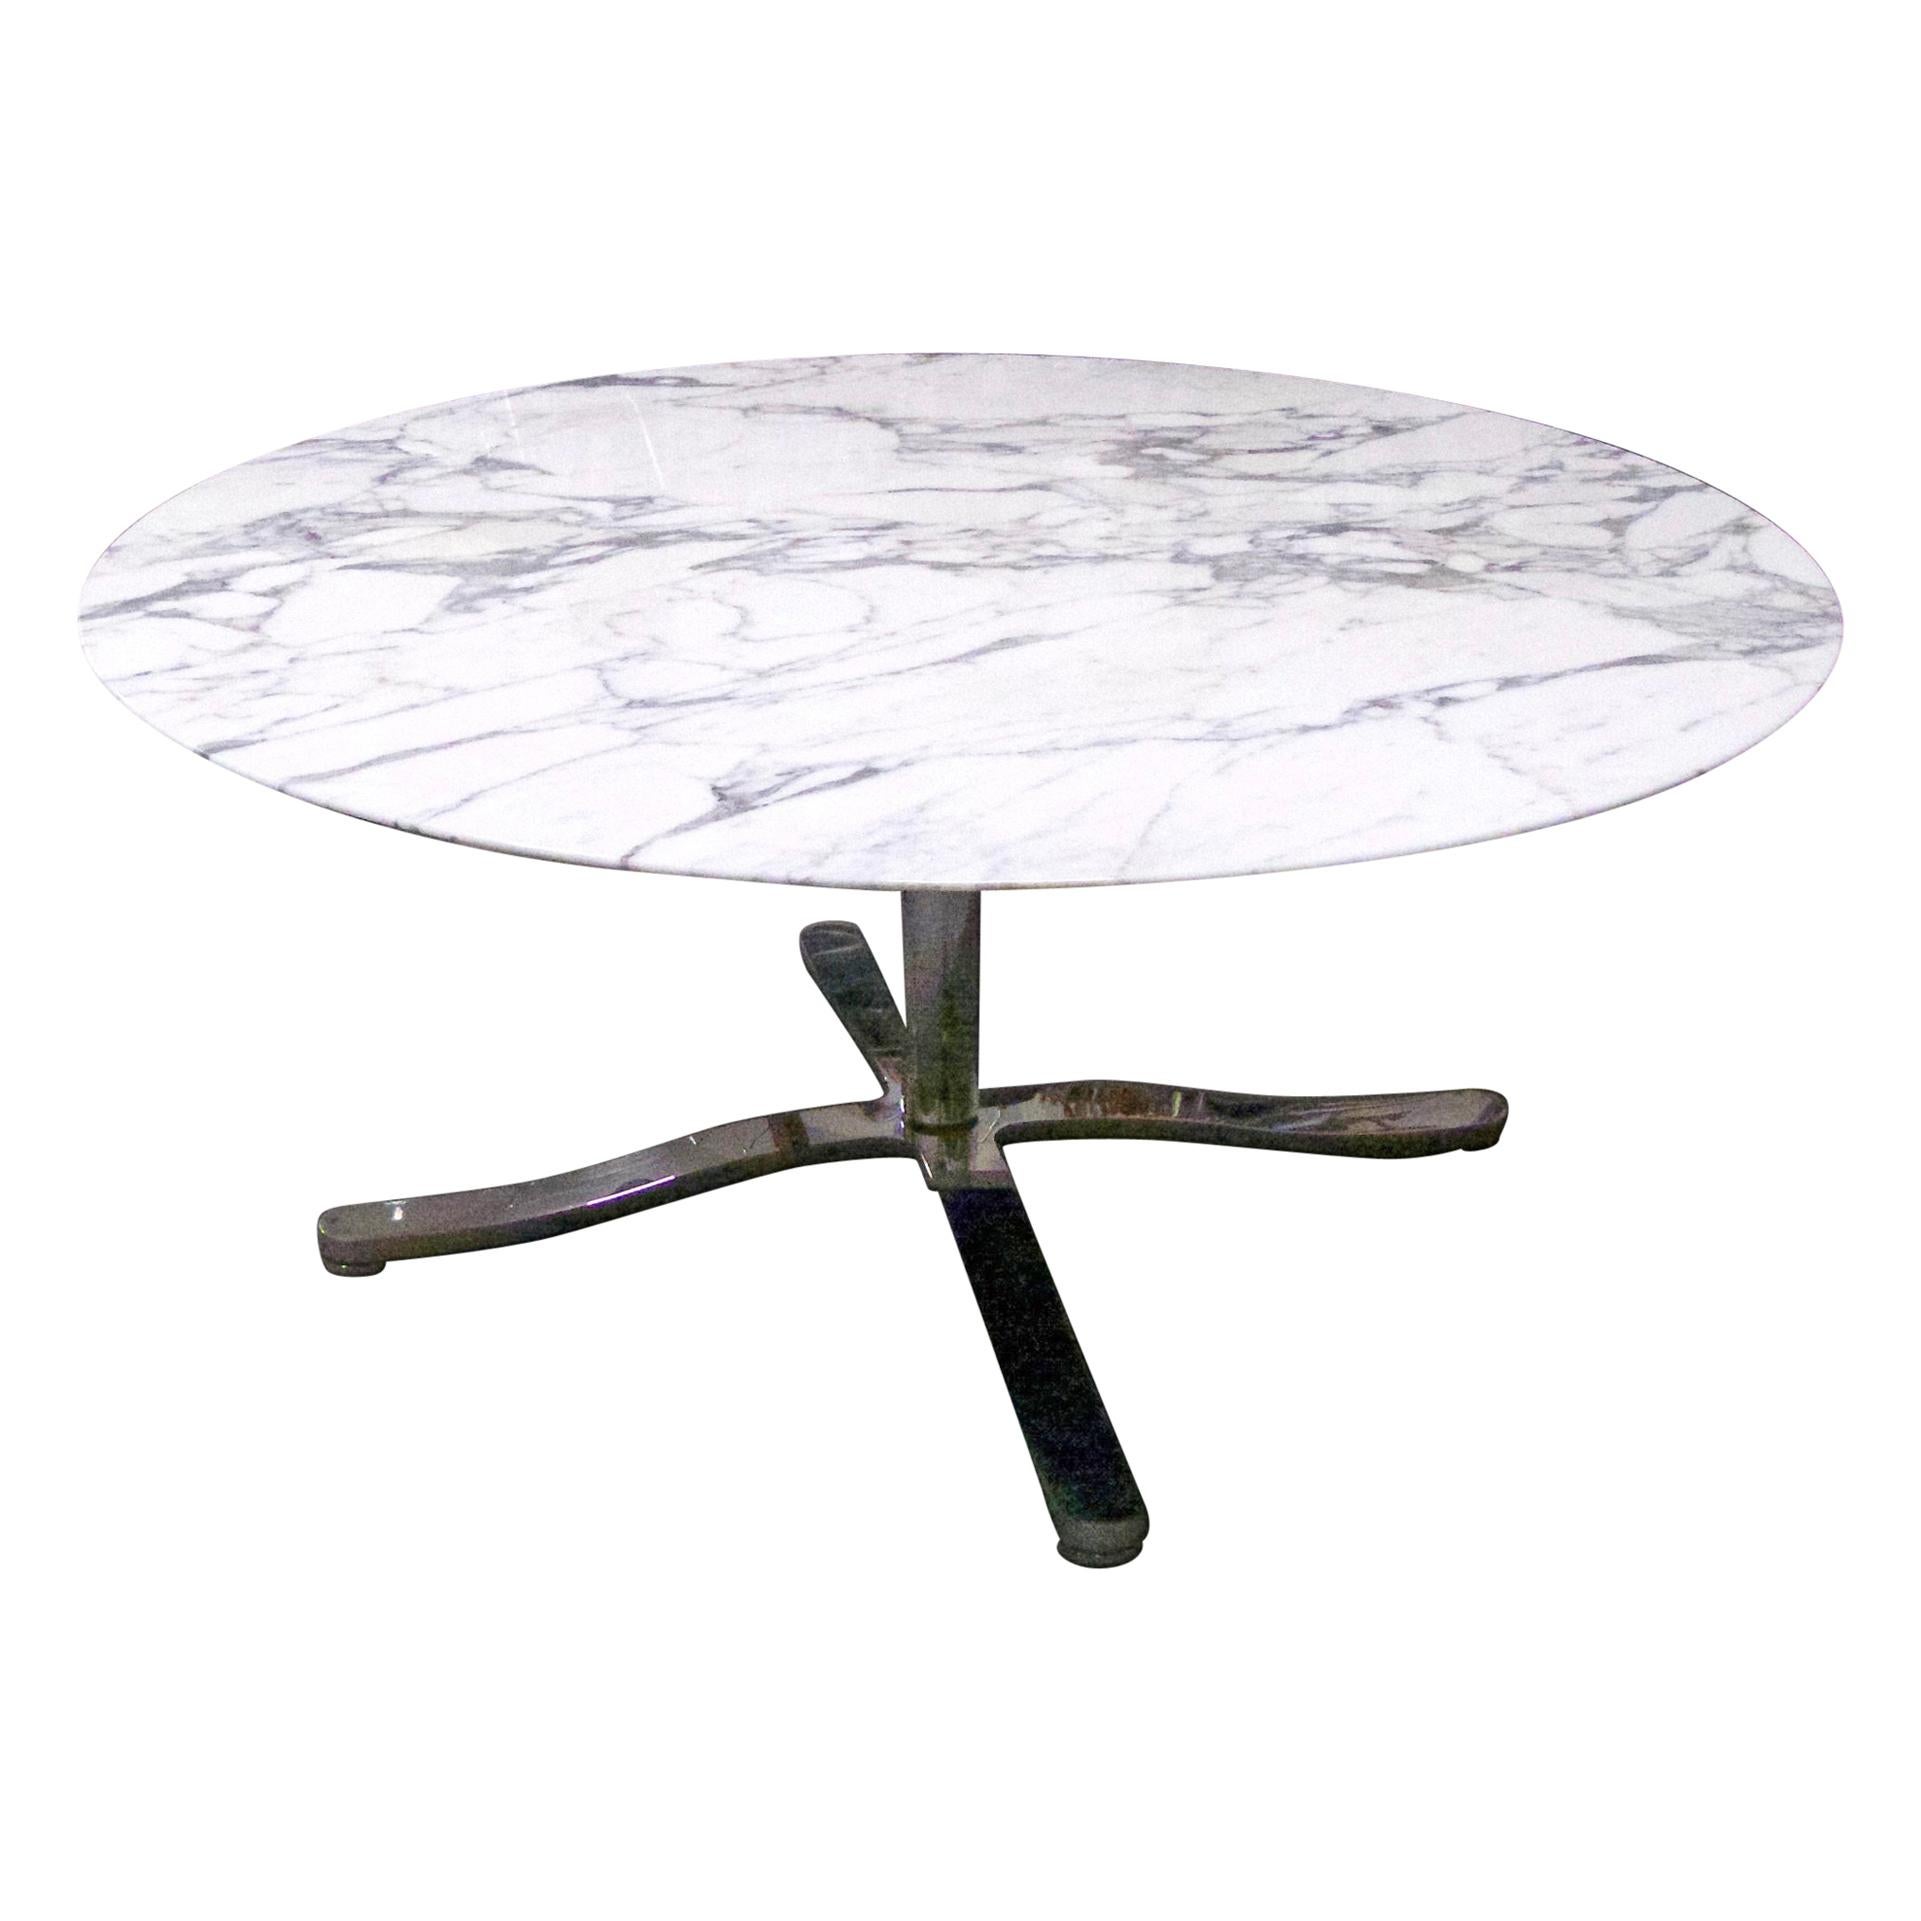 Monumental Nicos Zographos 5' Round Calacatta Marble Dining or Conference Table 